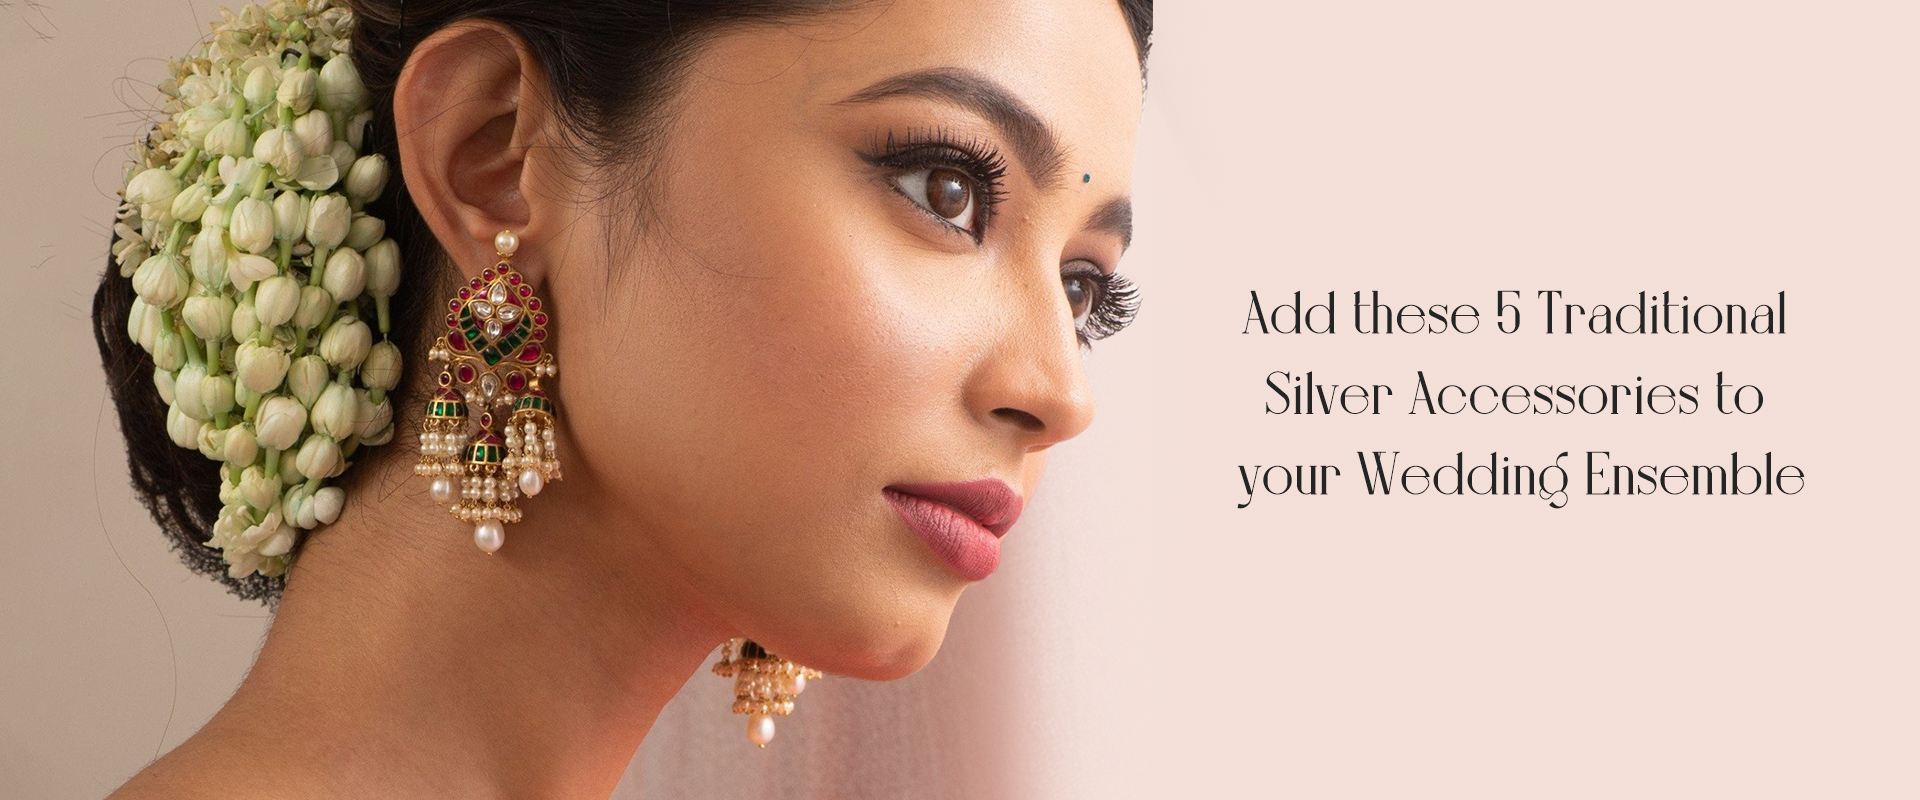 Add these 5 Traditional Silver Accessories to your Wedding Ensemble